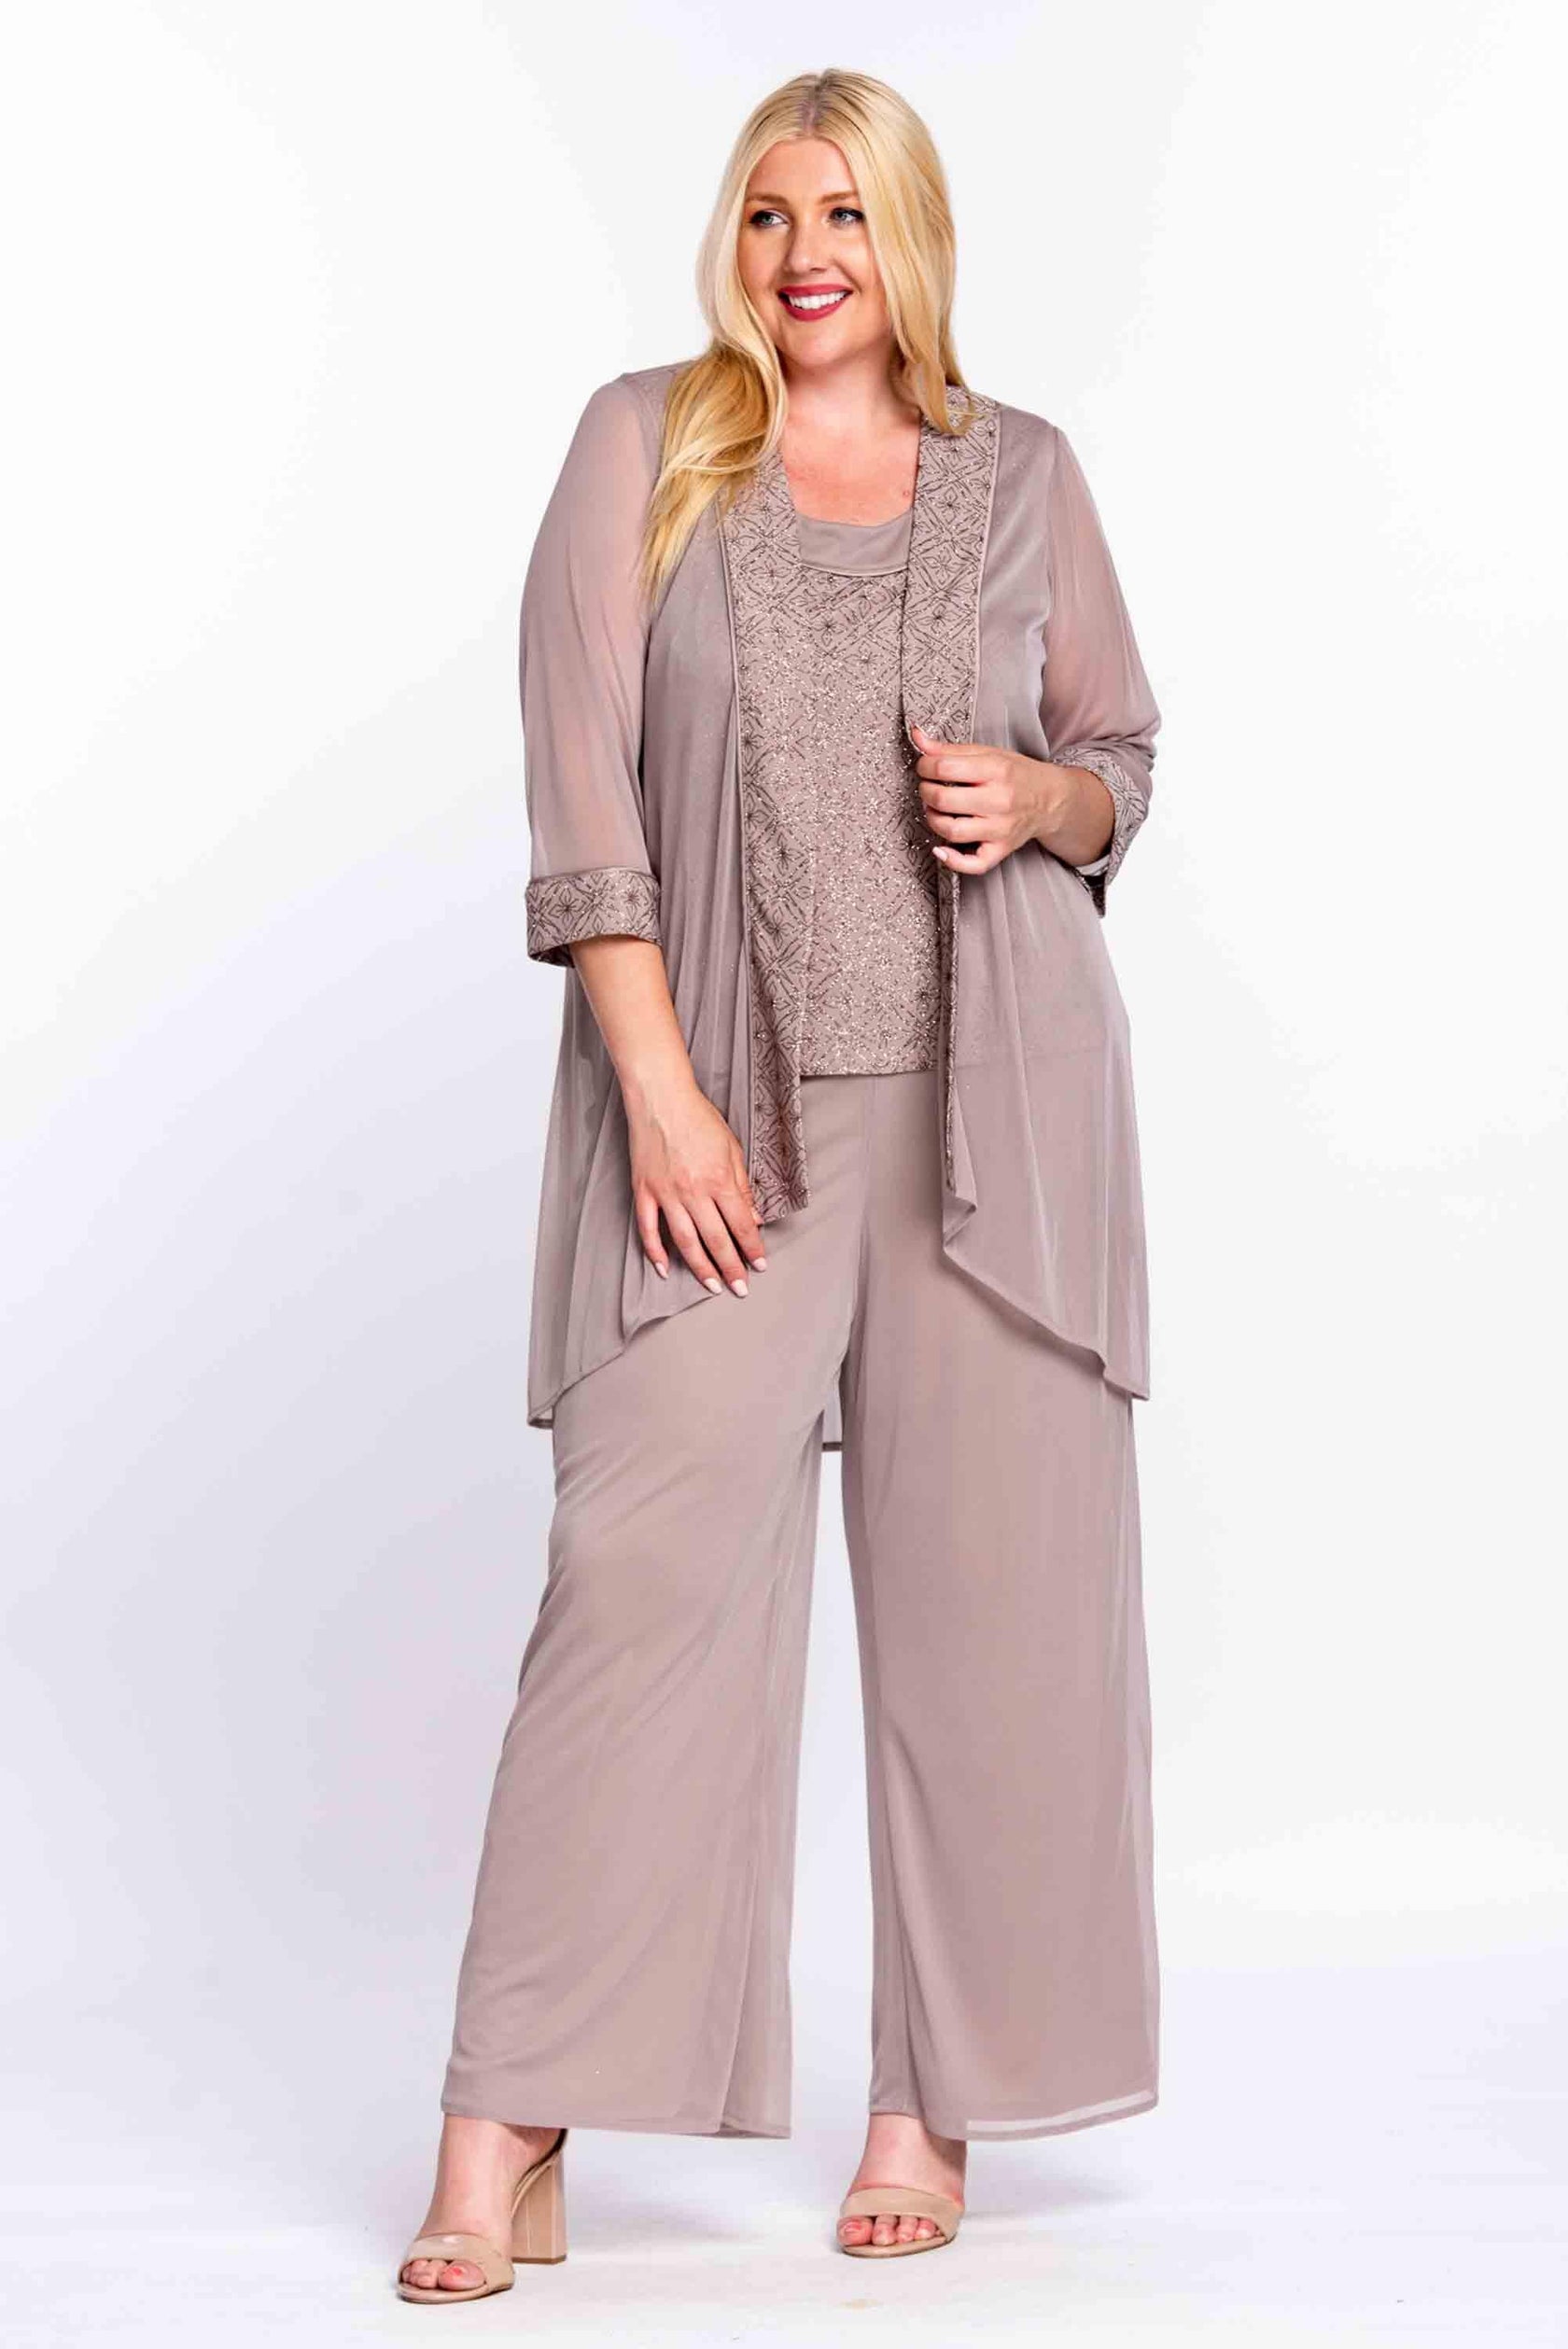 Orchid R&M Richards 5005 Long Mother Of The Bride Pant Suit for $19.99 ...